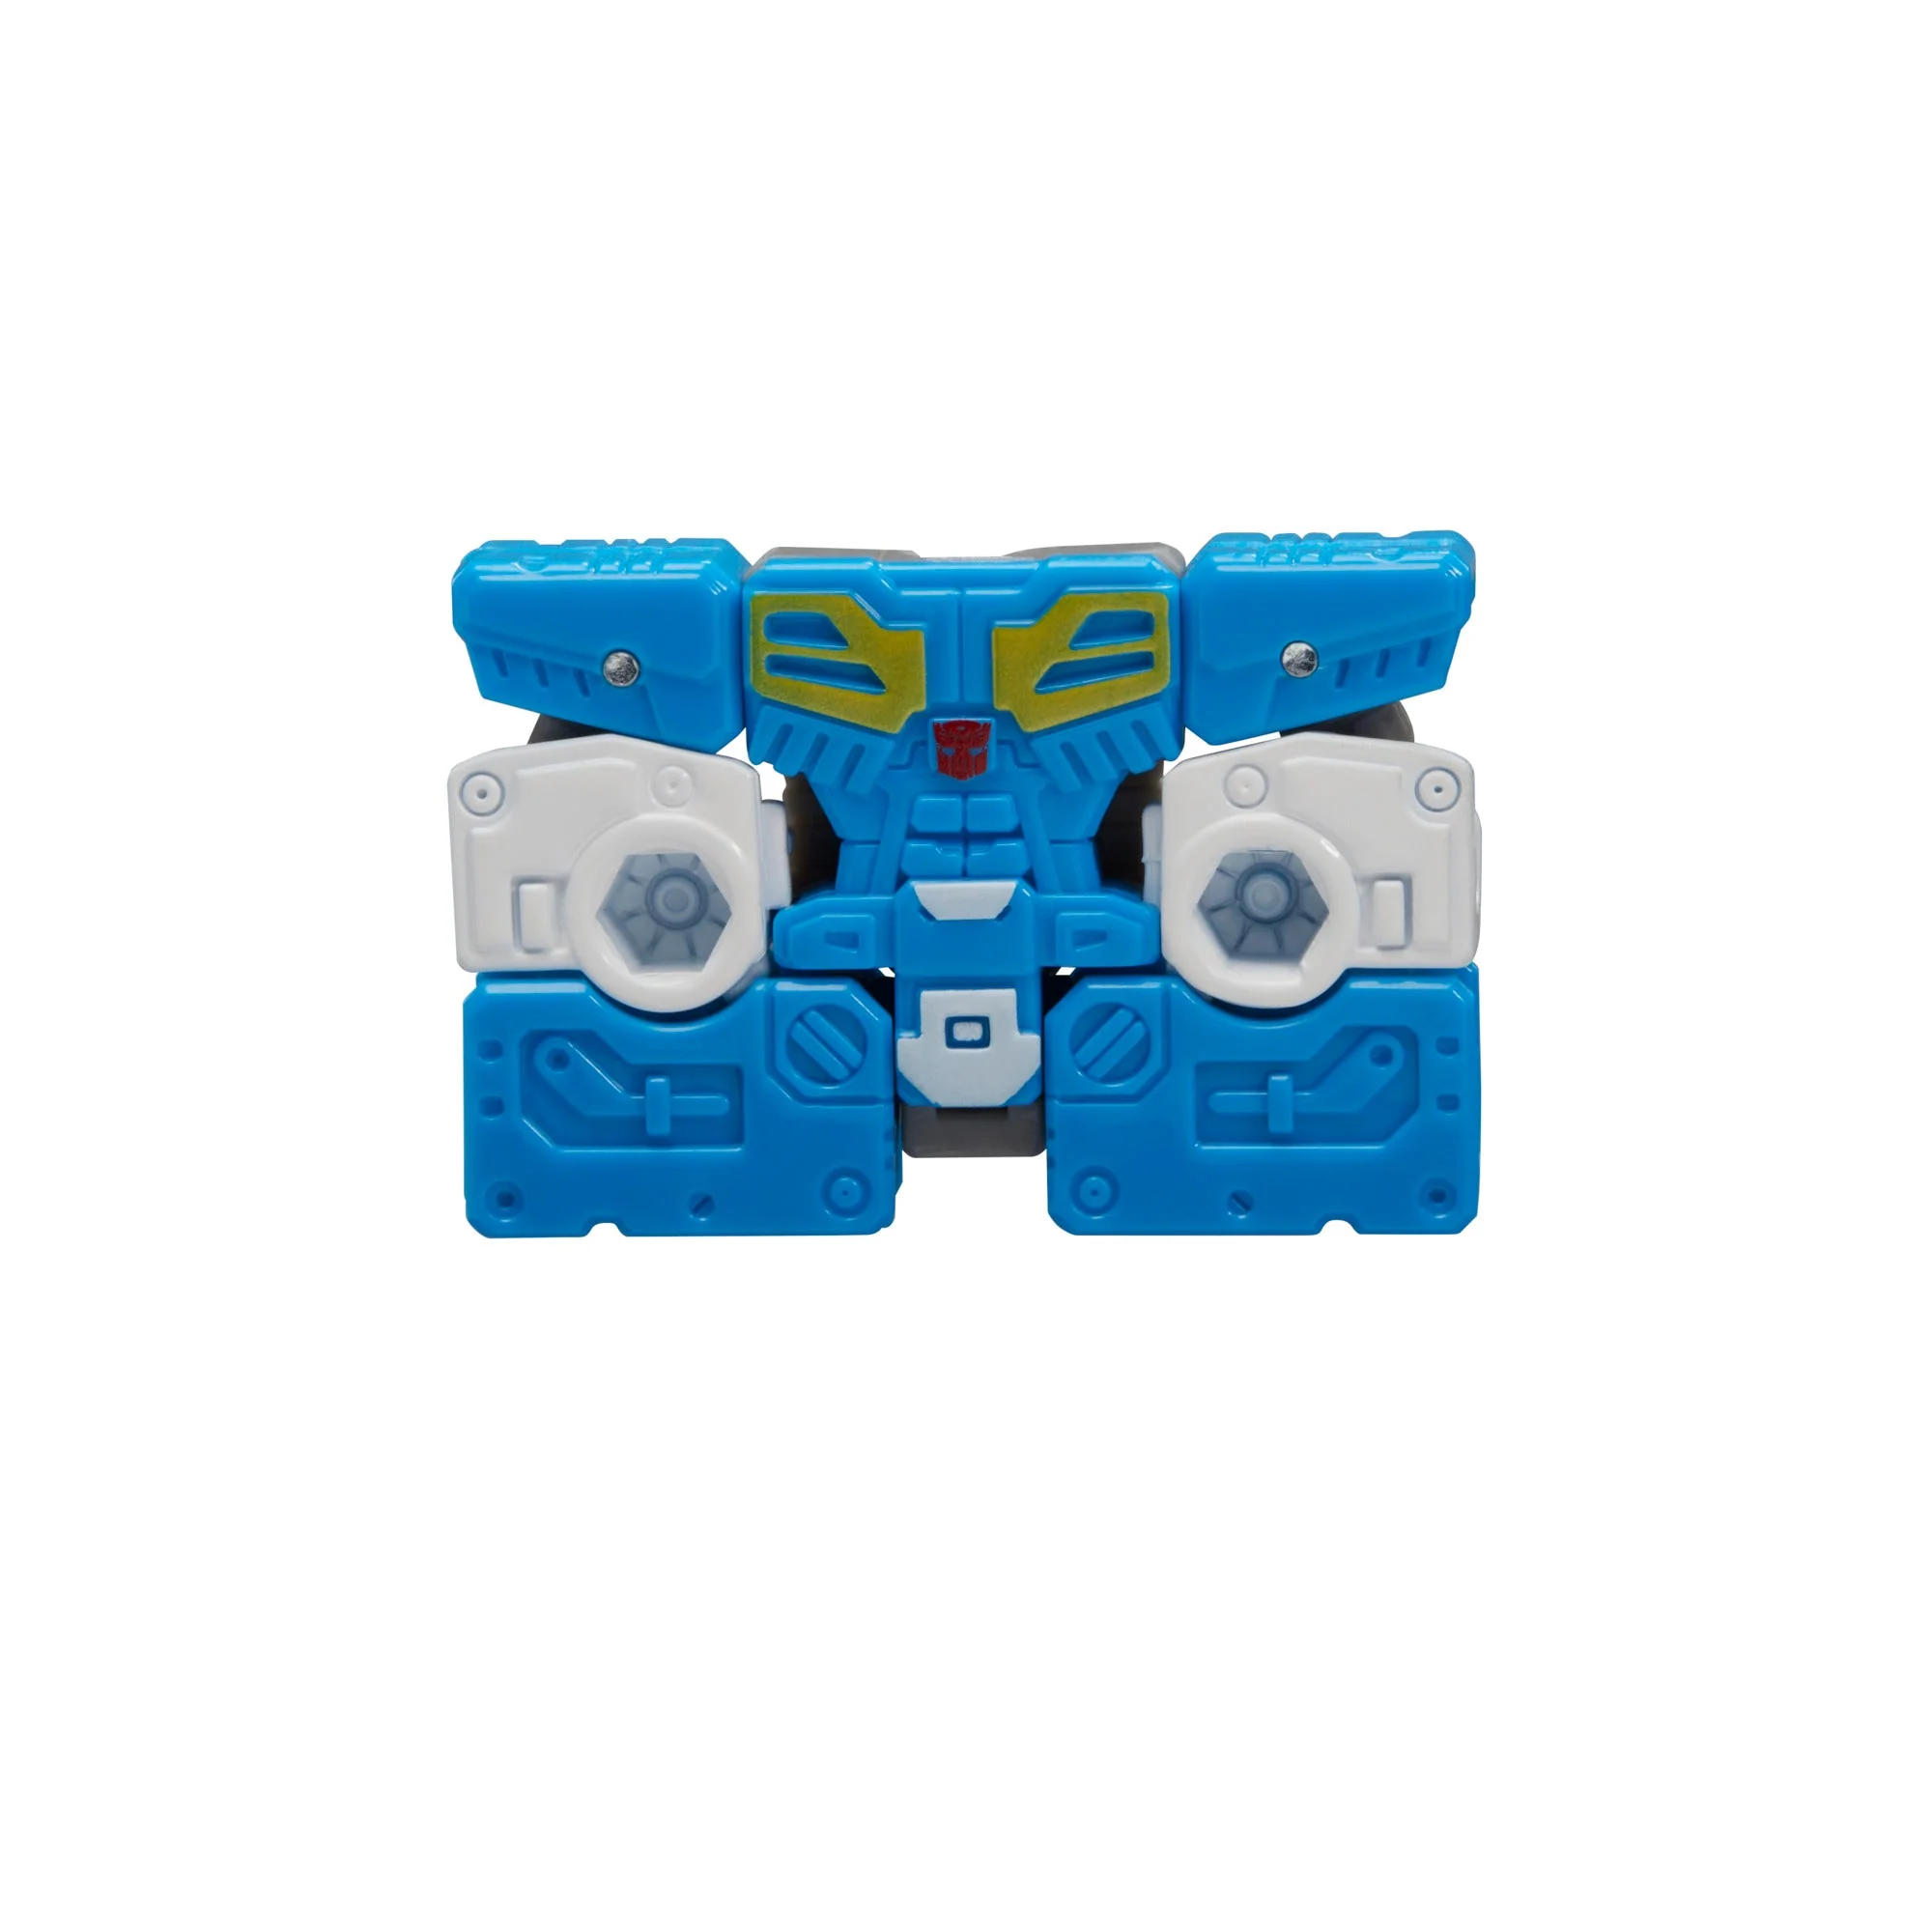 The Transformers The Movie Studio Series 86 25 Autobot Blaster Eject 6